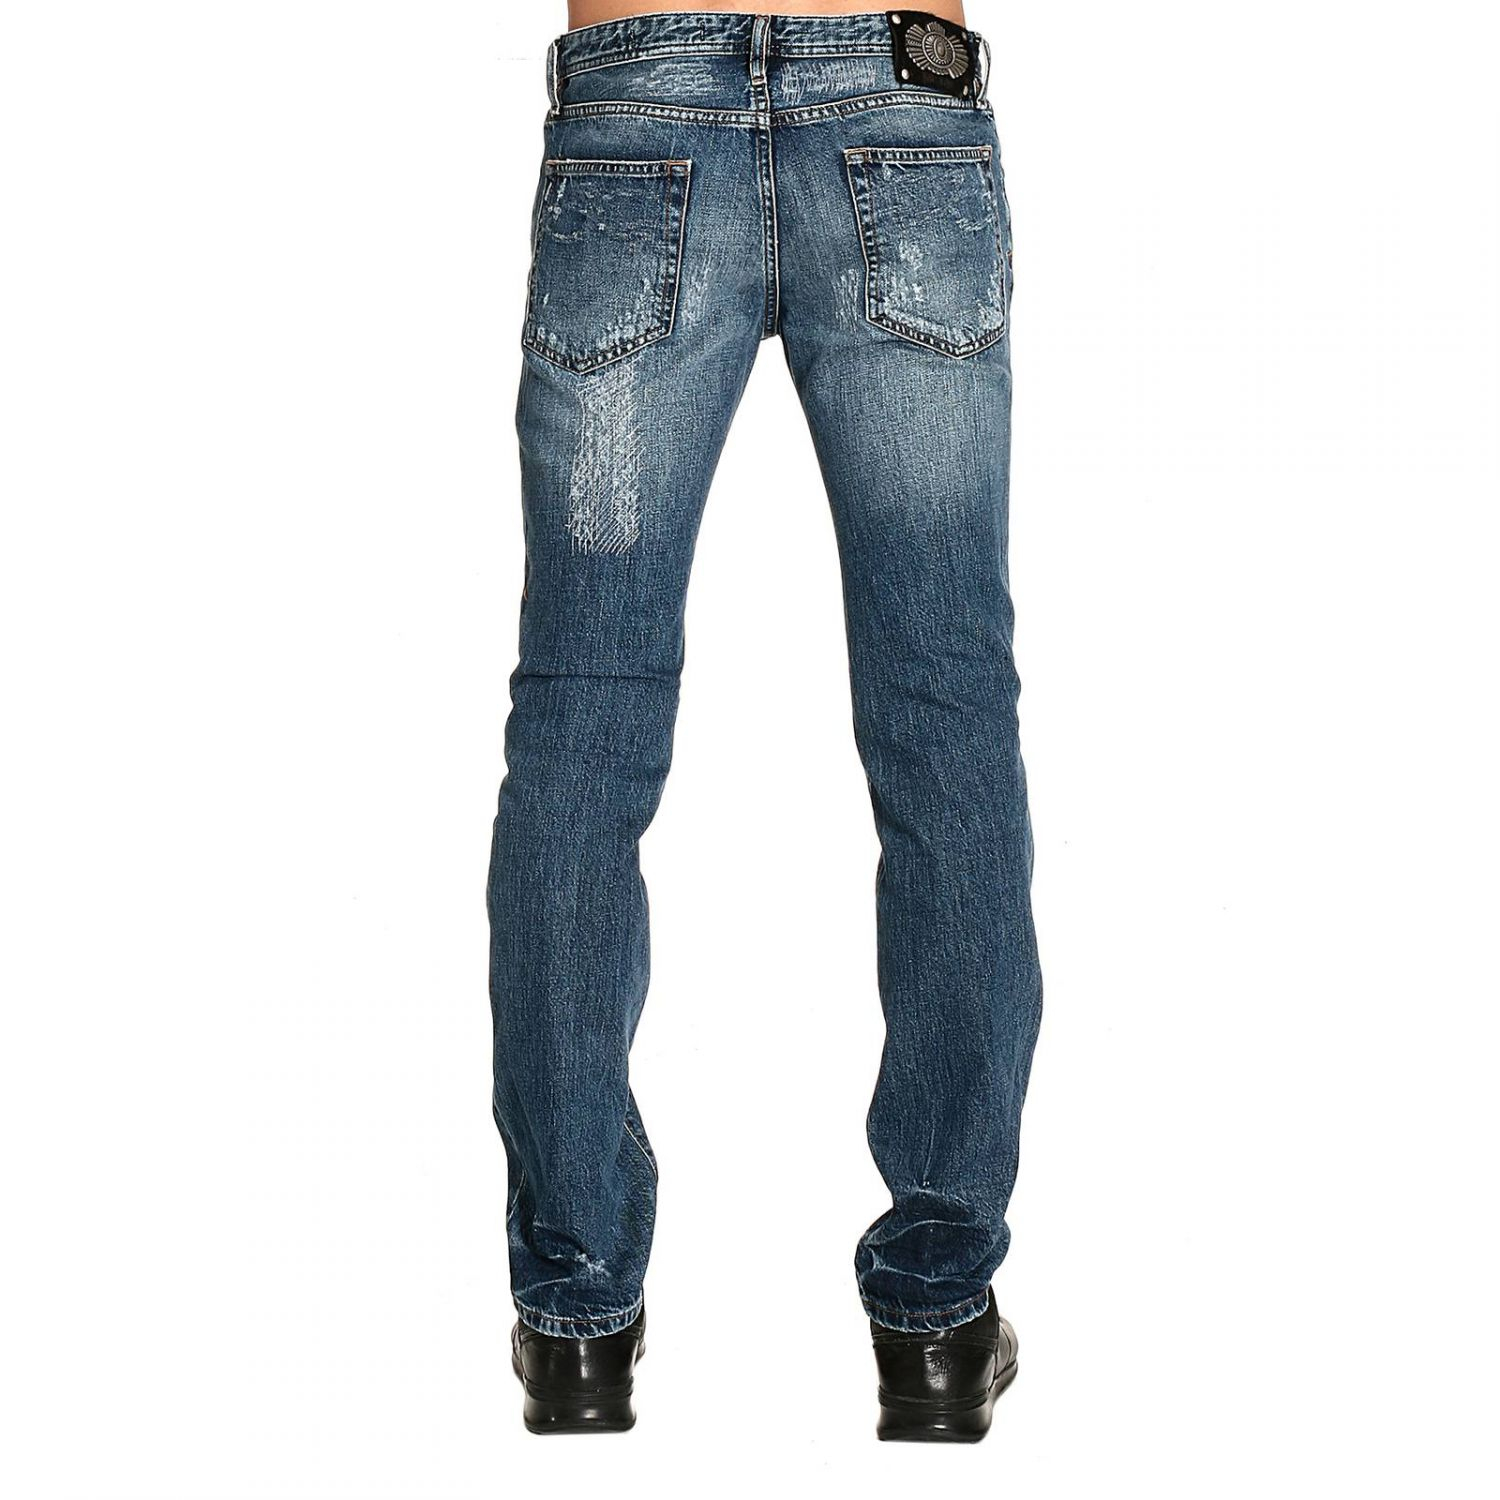 Lyst - Just Cavalli Stitiched-Detail Straight-Leg Jeans in Blue for Men